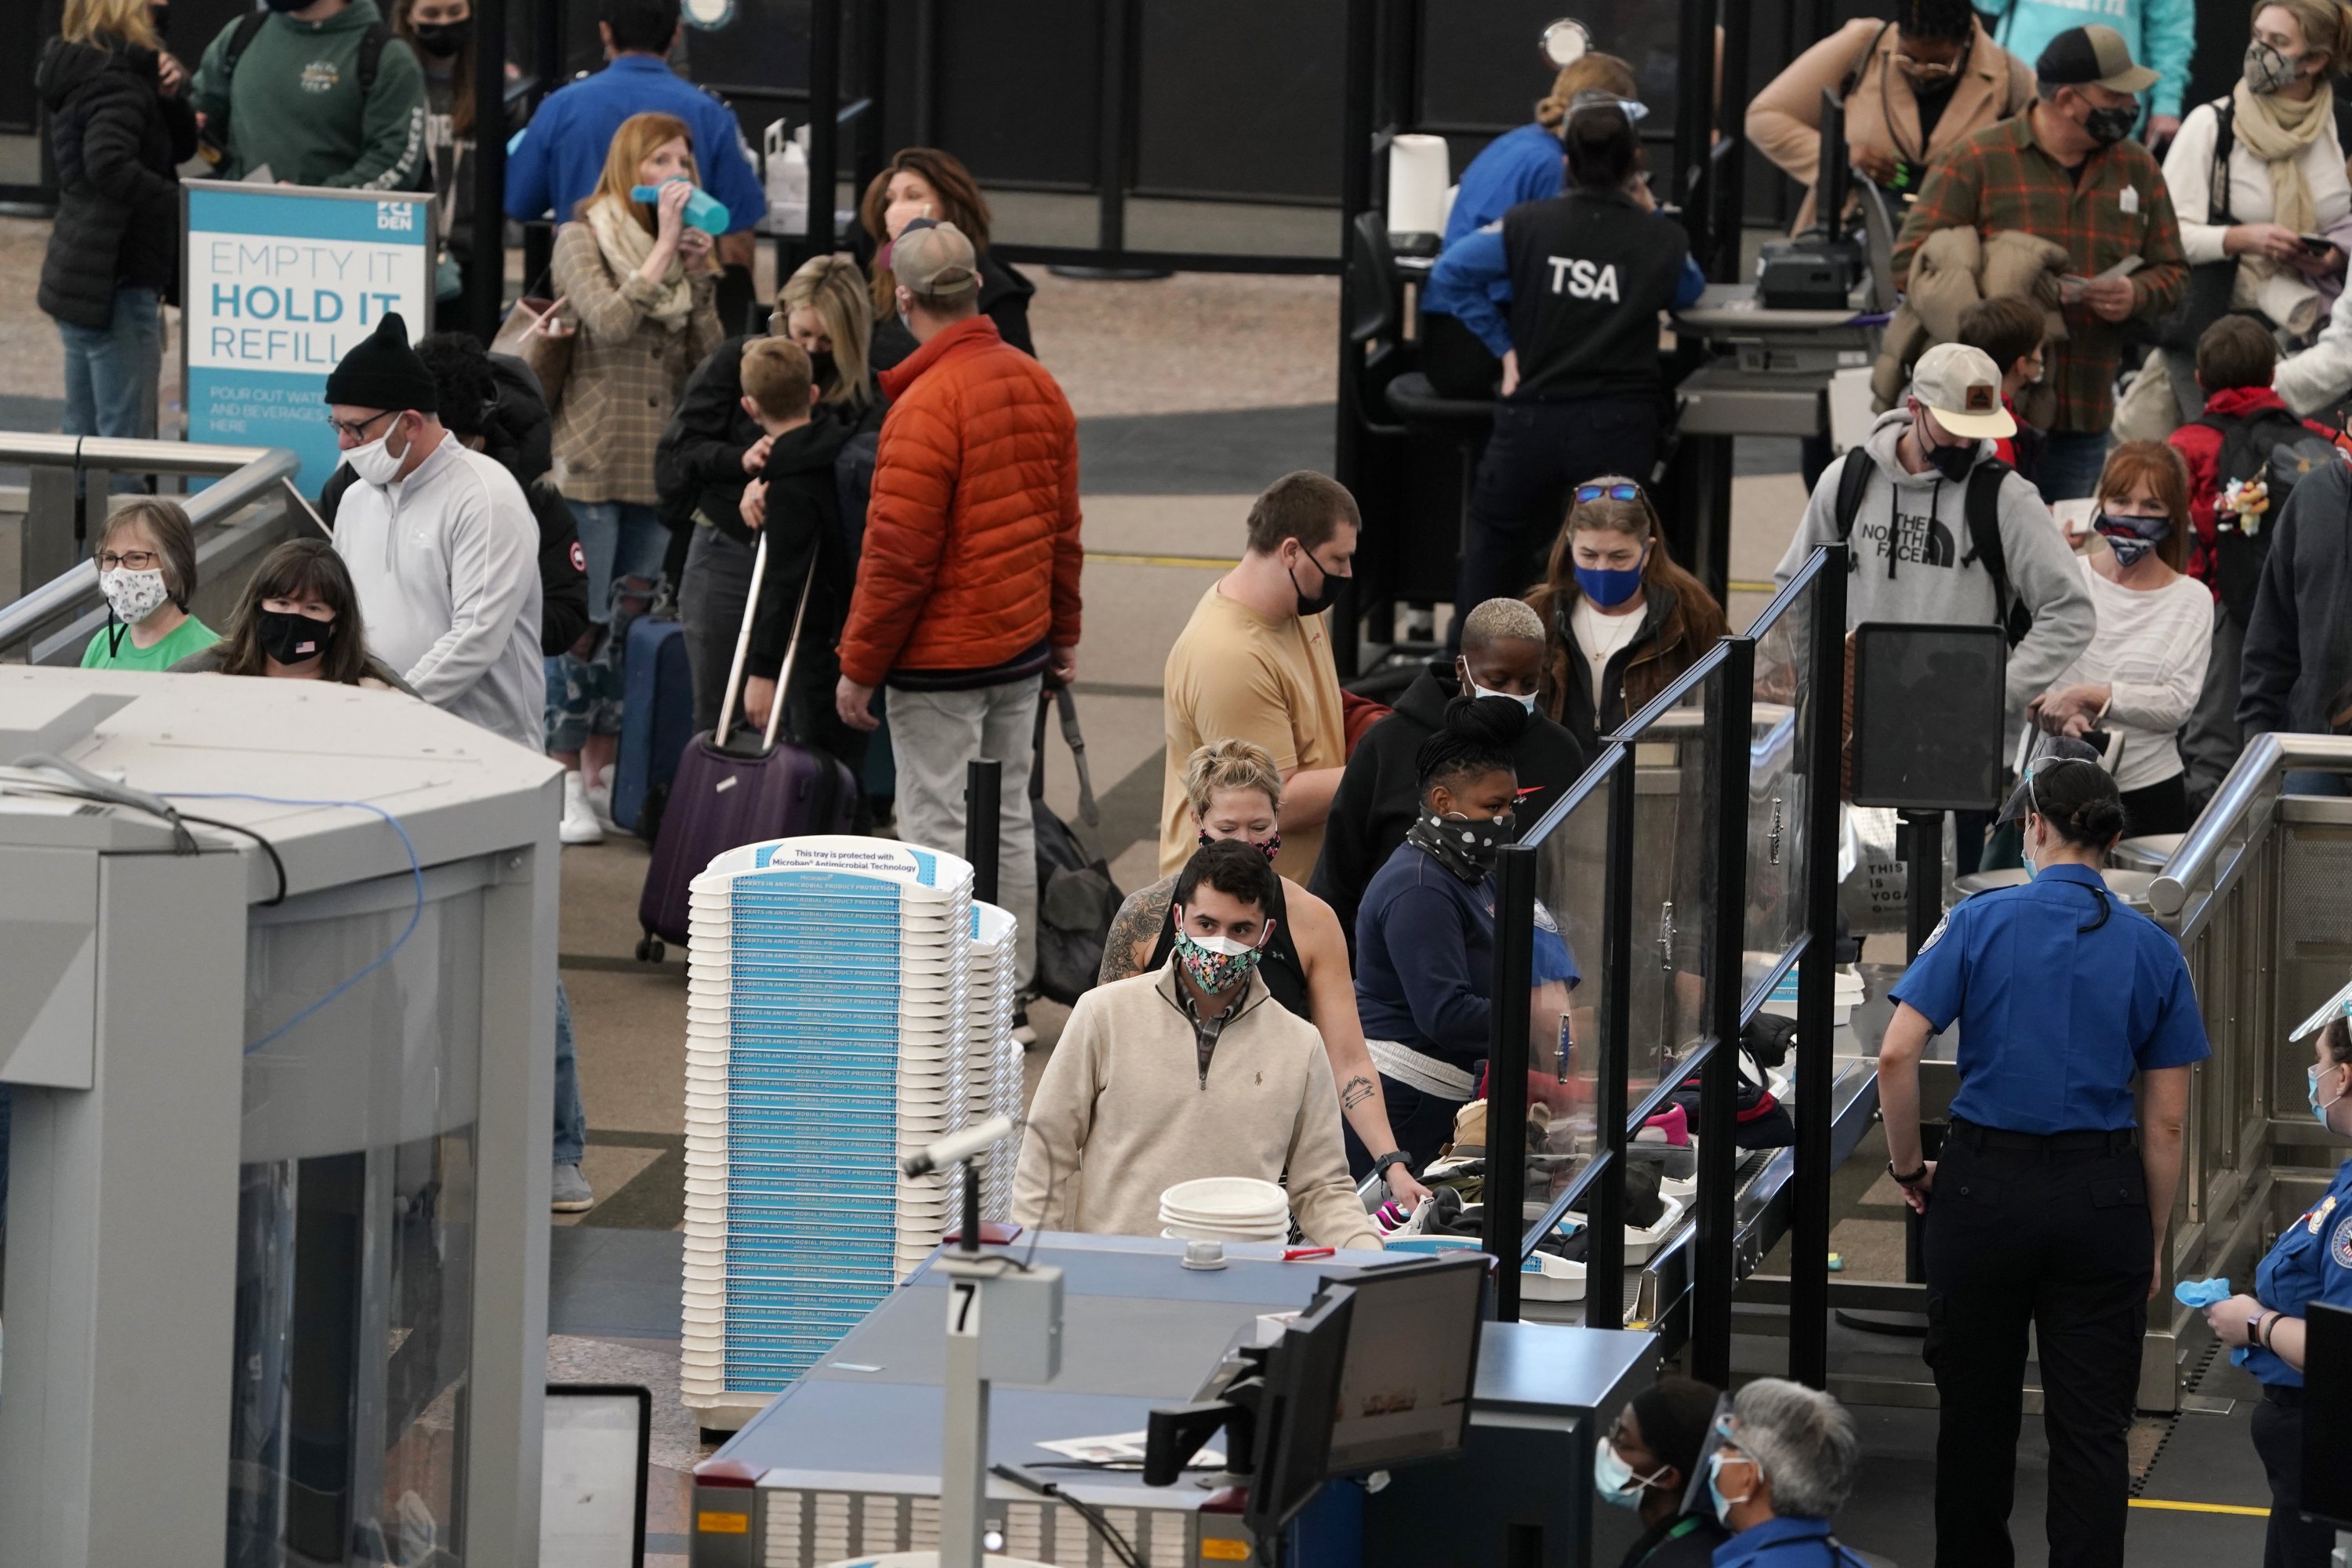 Airlines plan to ask passengers for contact tracking details